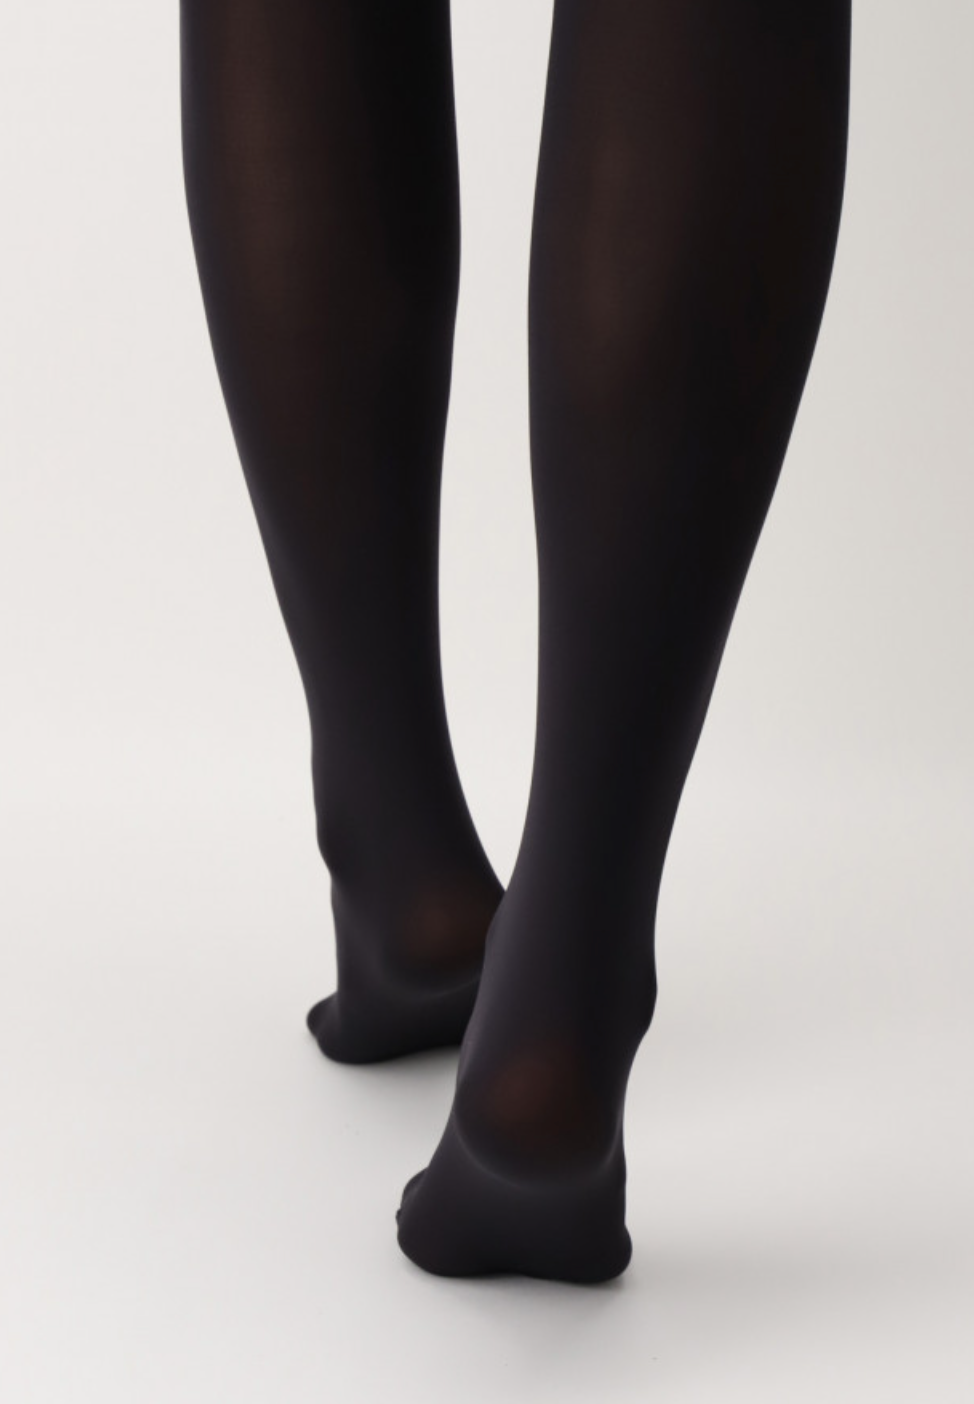 OroblÌ_ Eco 60 Tights - Black opaque tights made from recycled nylon. This tight is soft, matte, has flat seams and cotton gusset. This is a new way of achieving and implementing sustainable living.